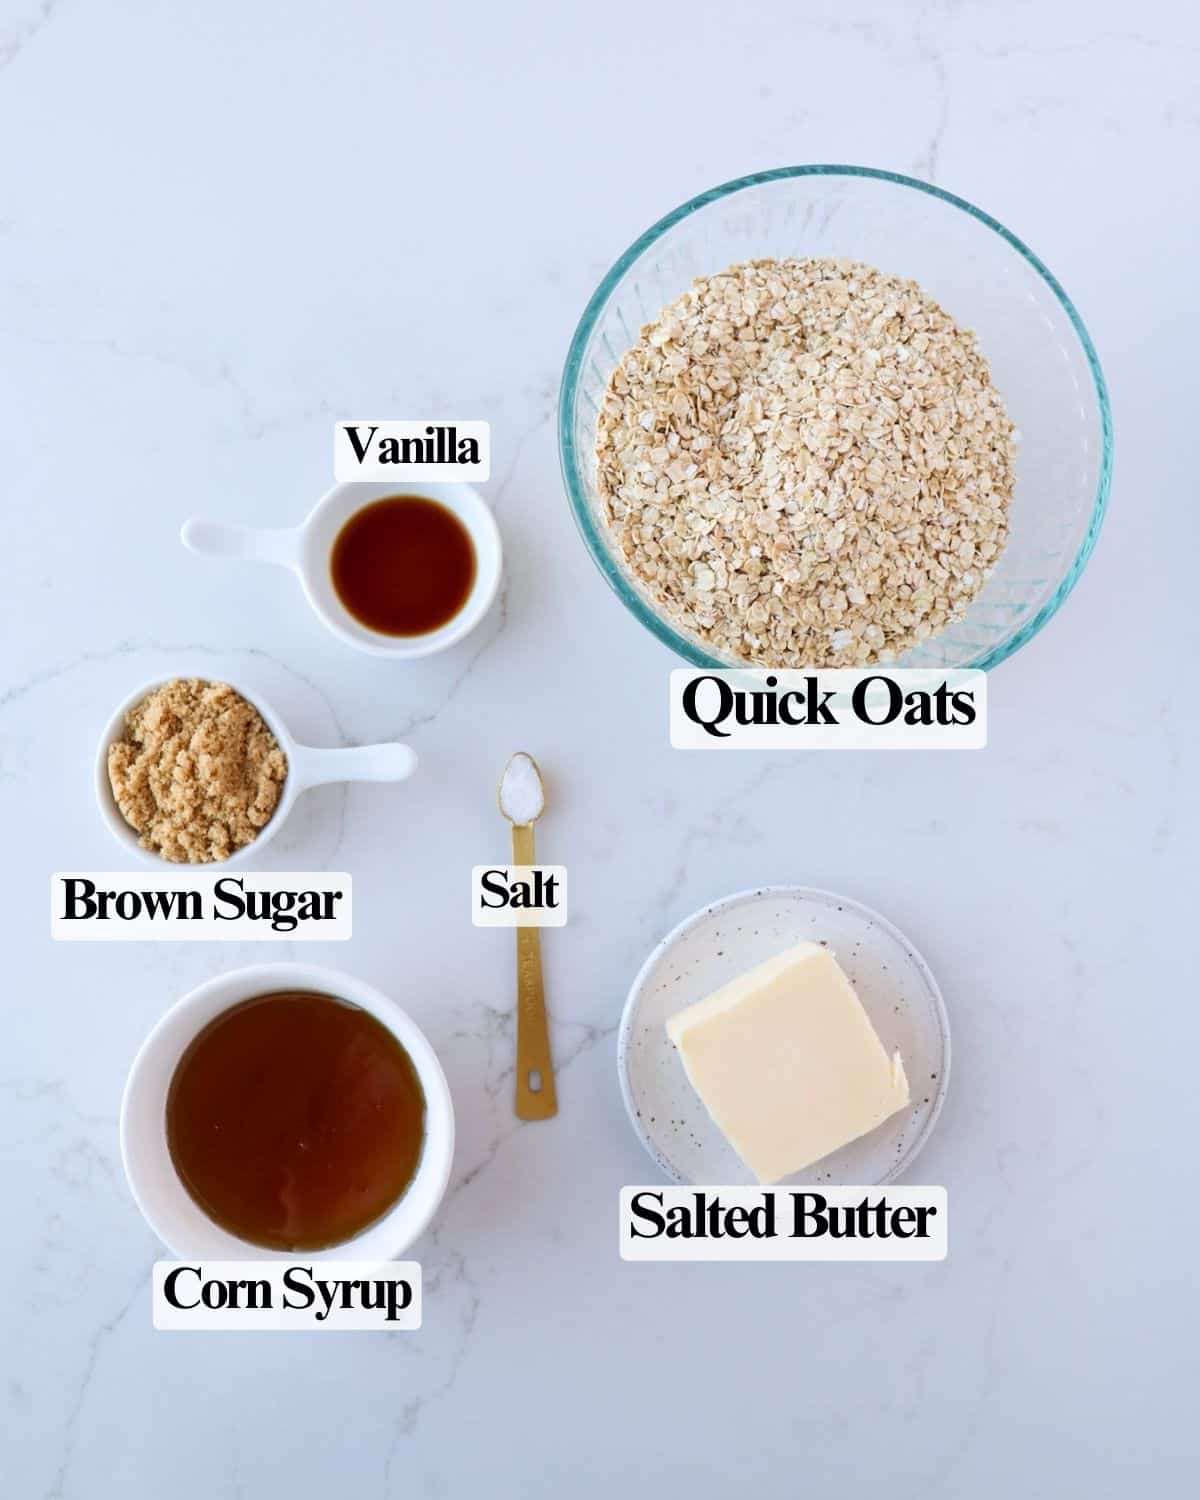 Labeled ingredients for oat bars.